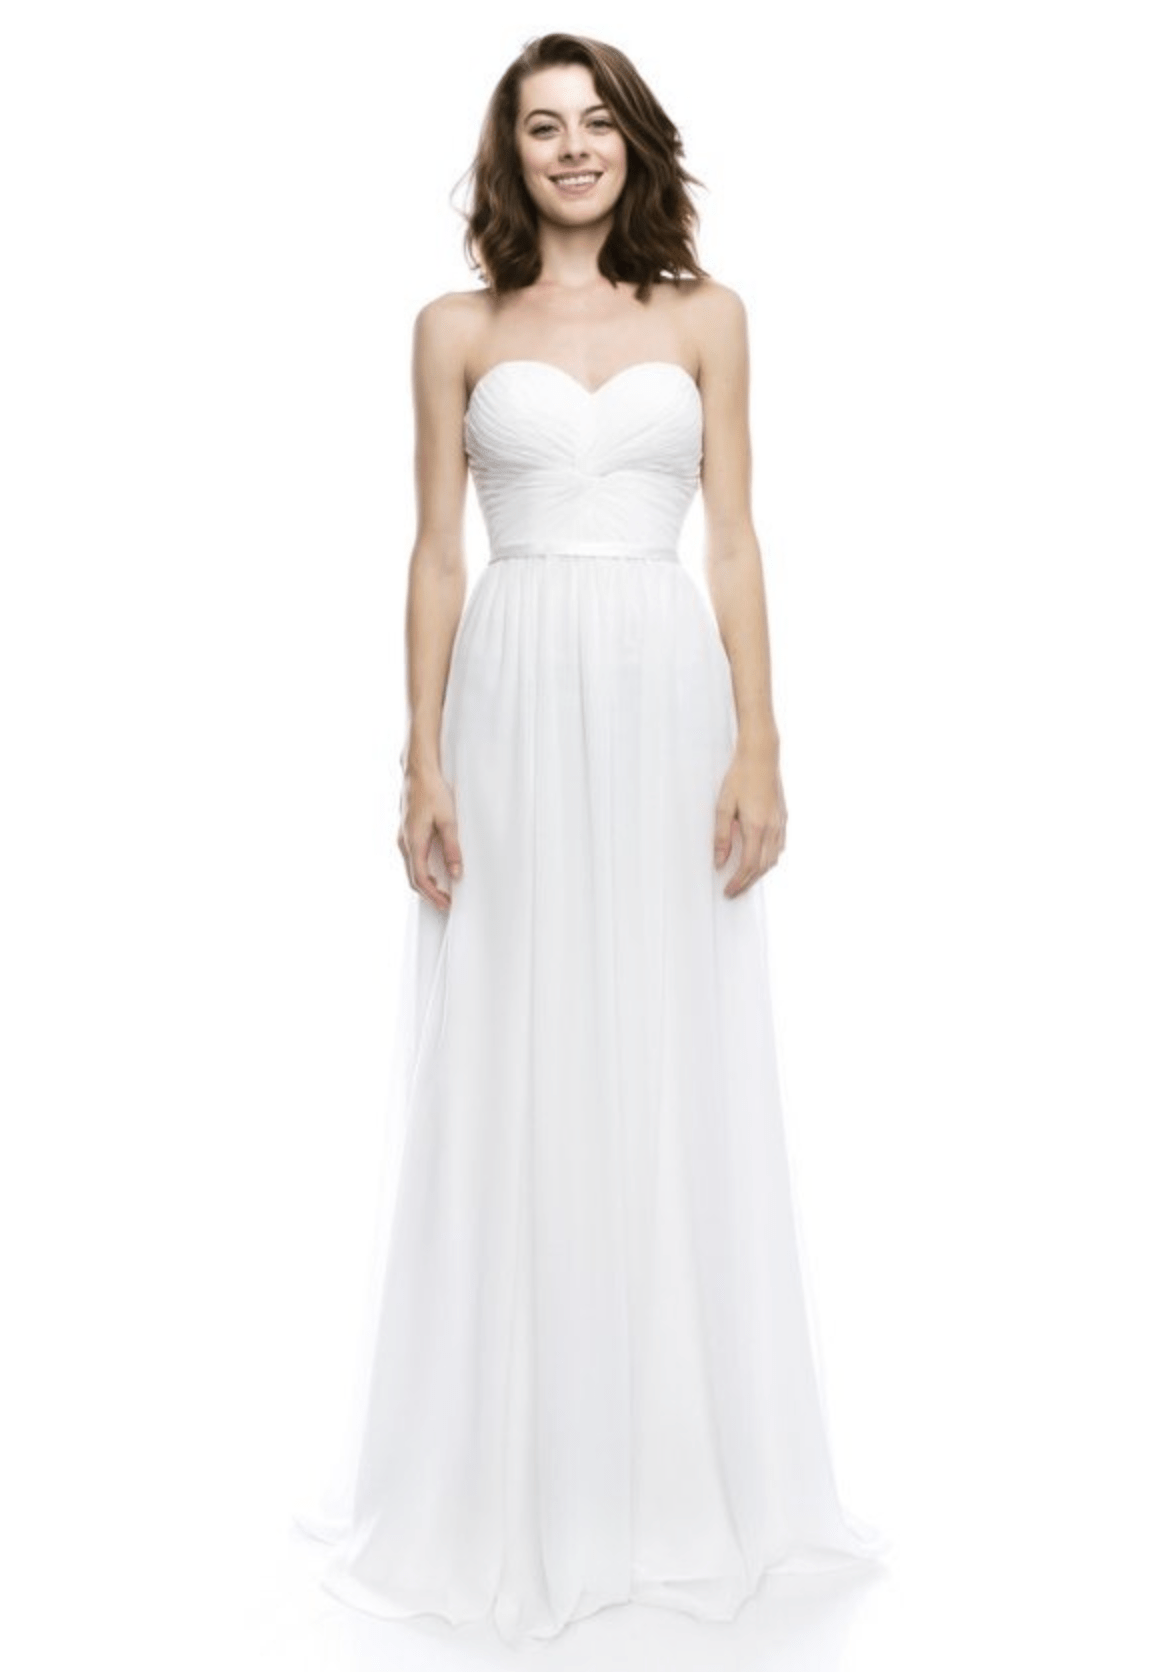 Strapless Chiffon Dress by Chicas | 16 Colors Collection 2 - NORMA REED